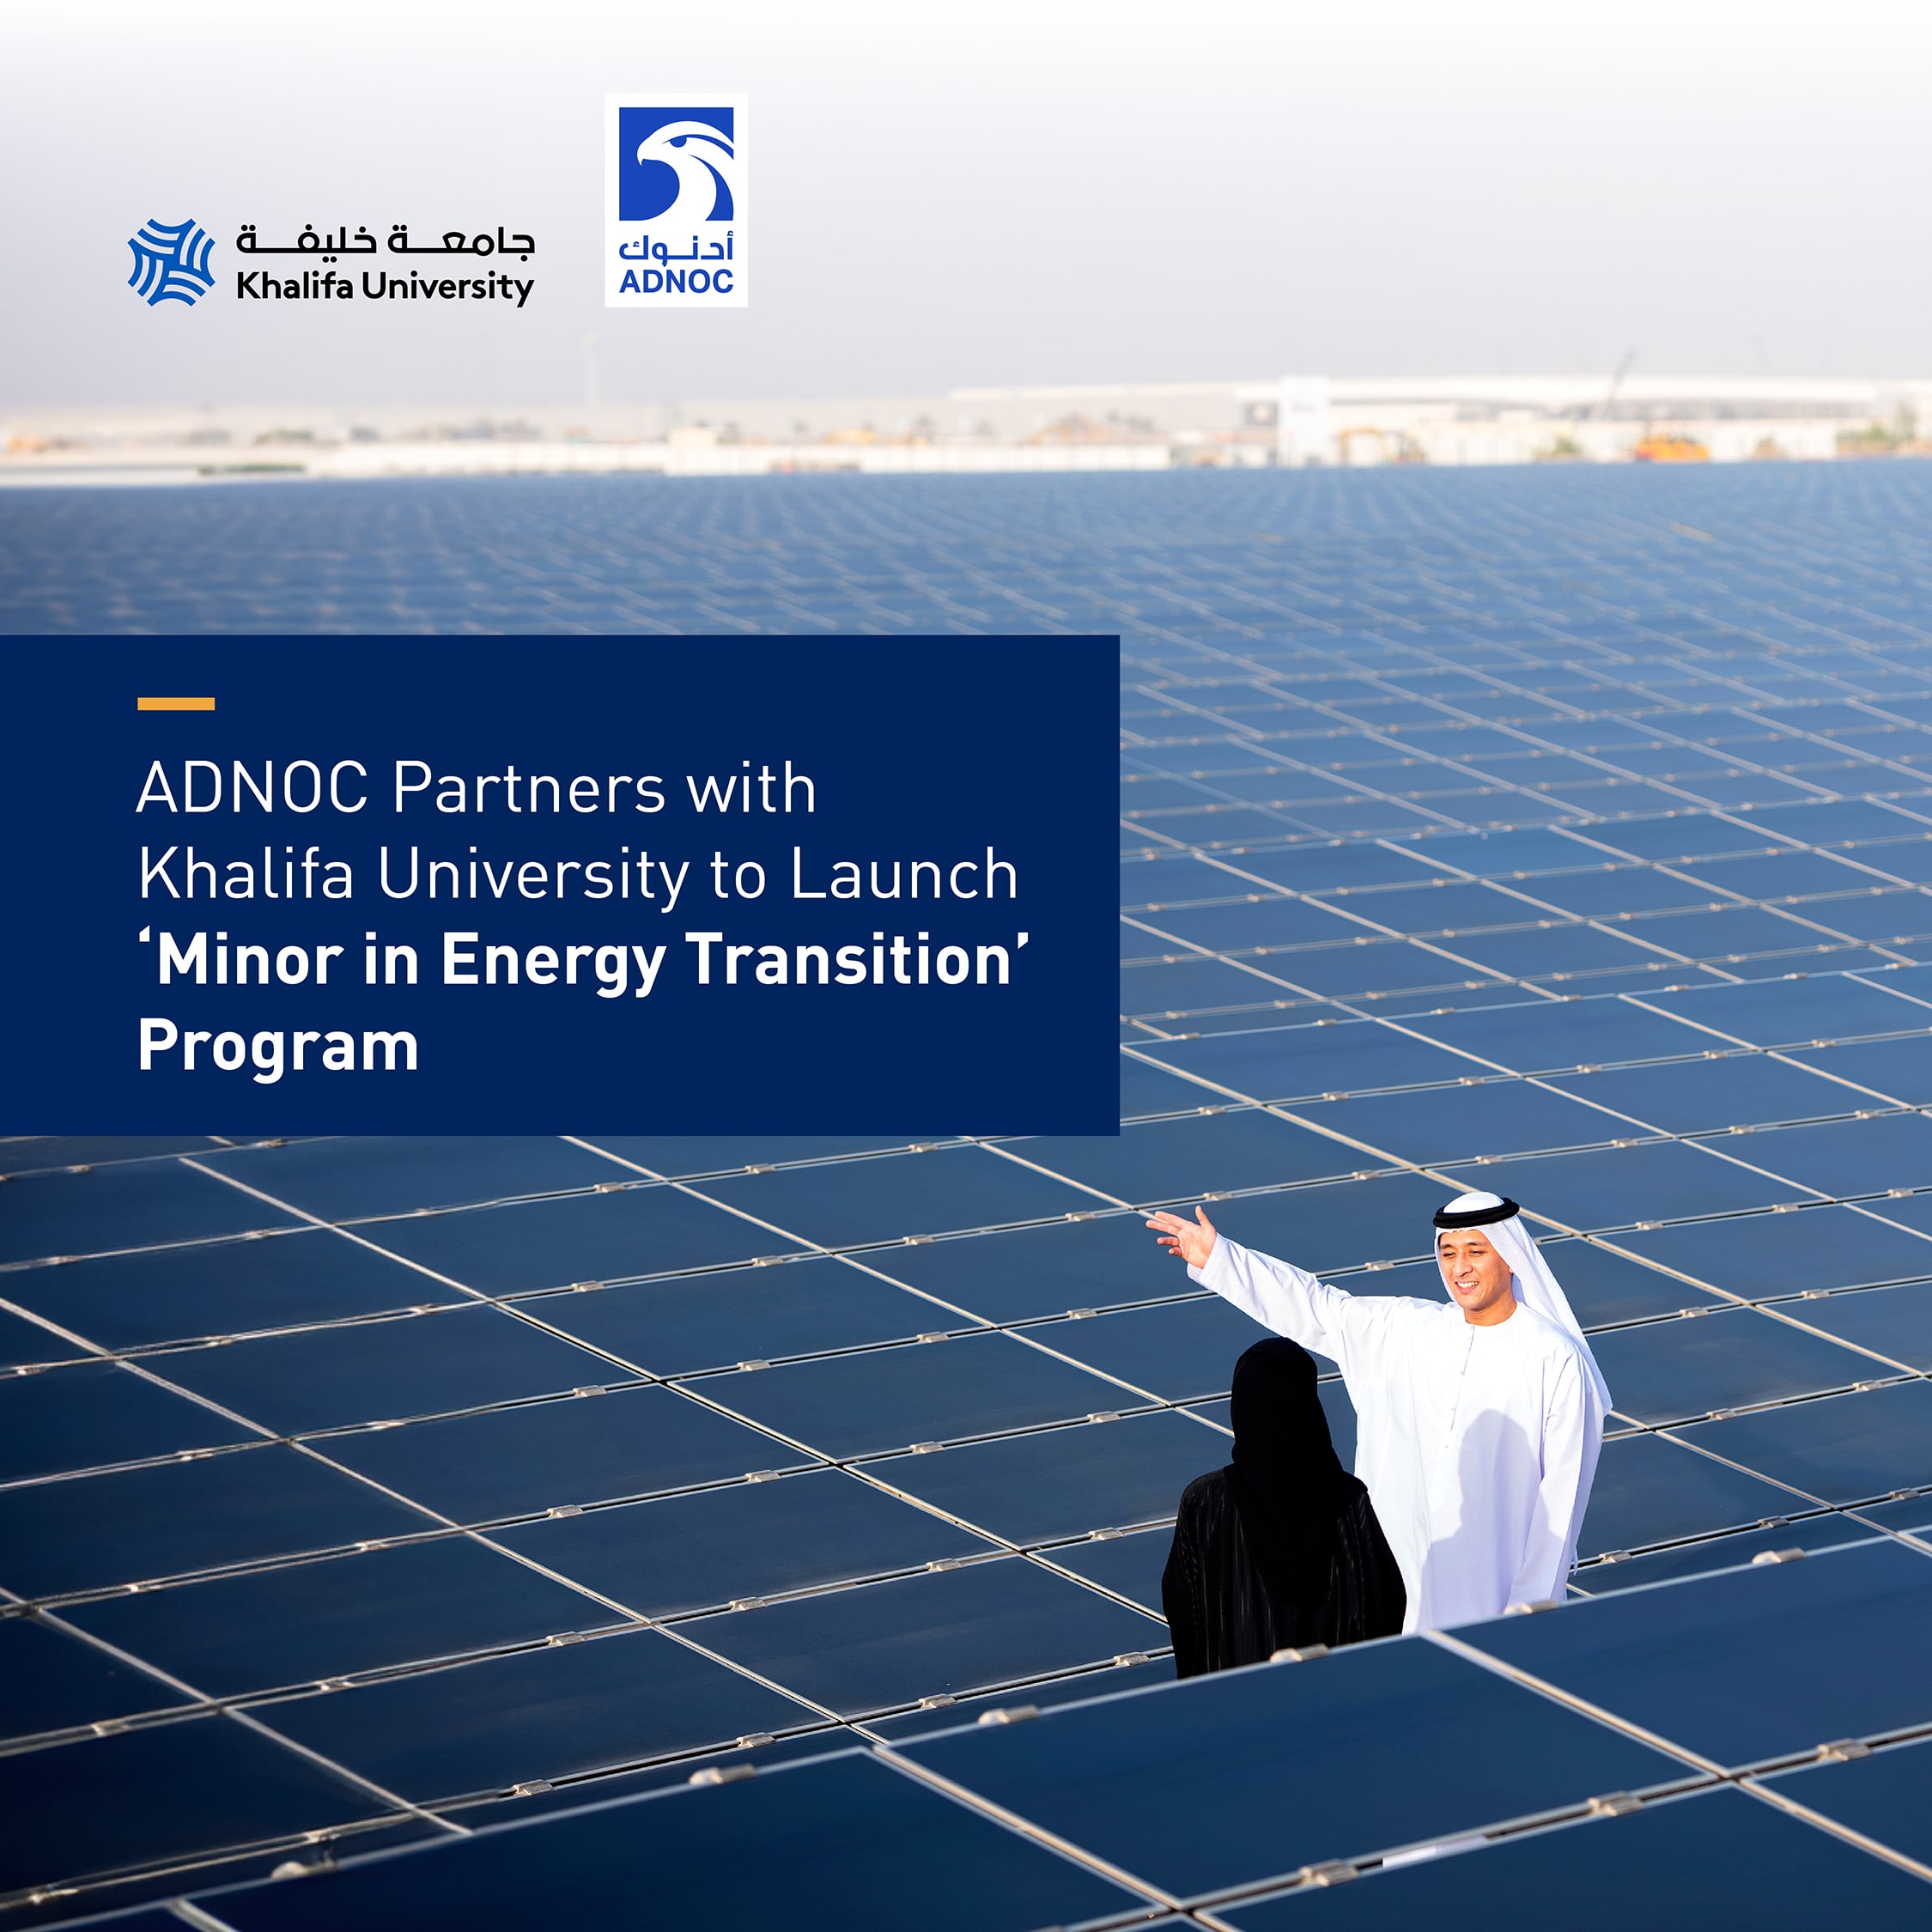 ADNOC Partners with Khalifa University to Launch Minor in Energy Transition’ Program